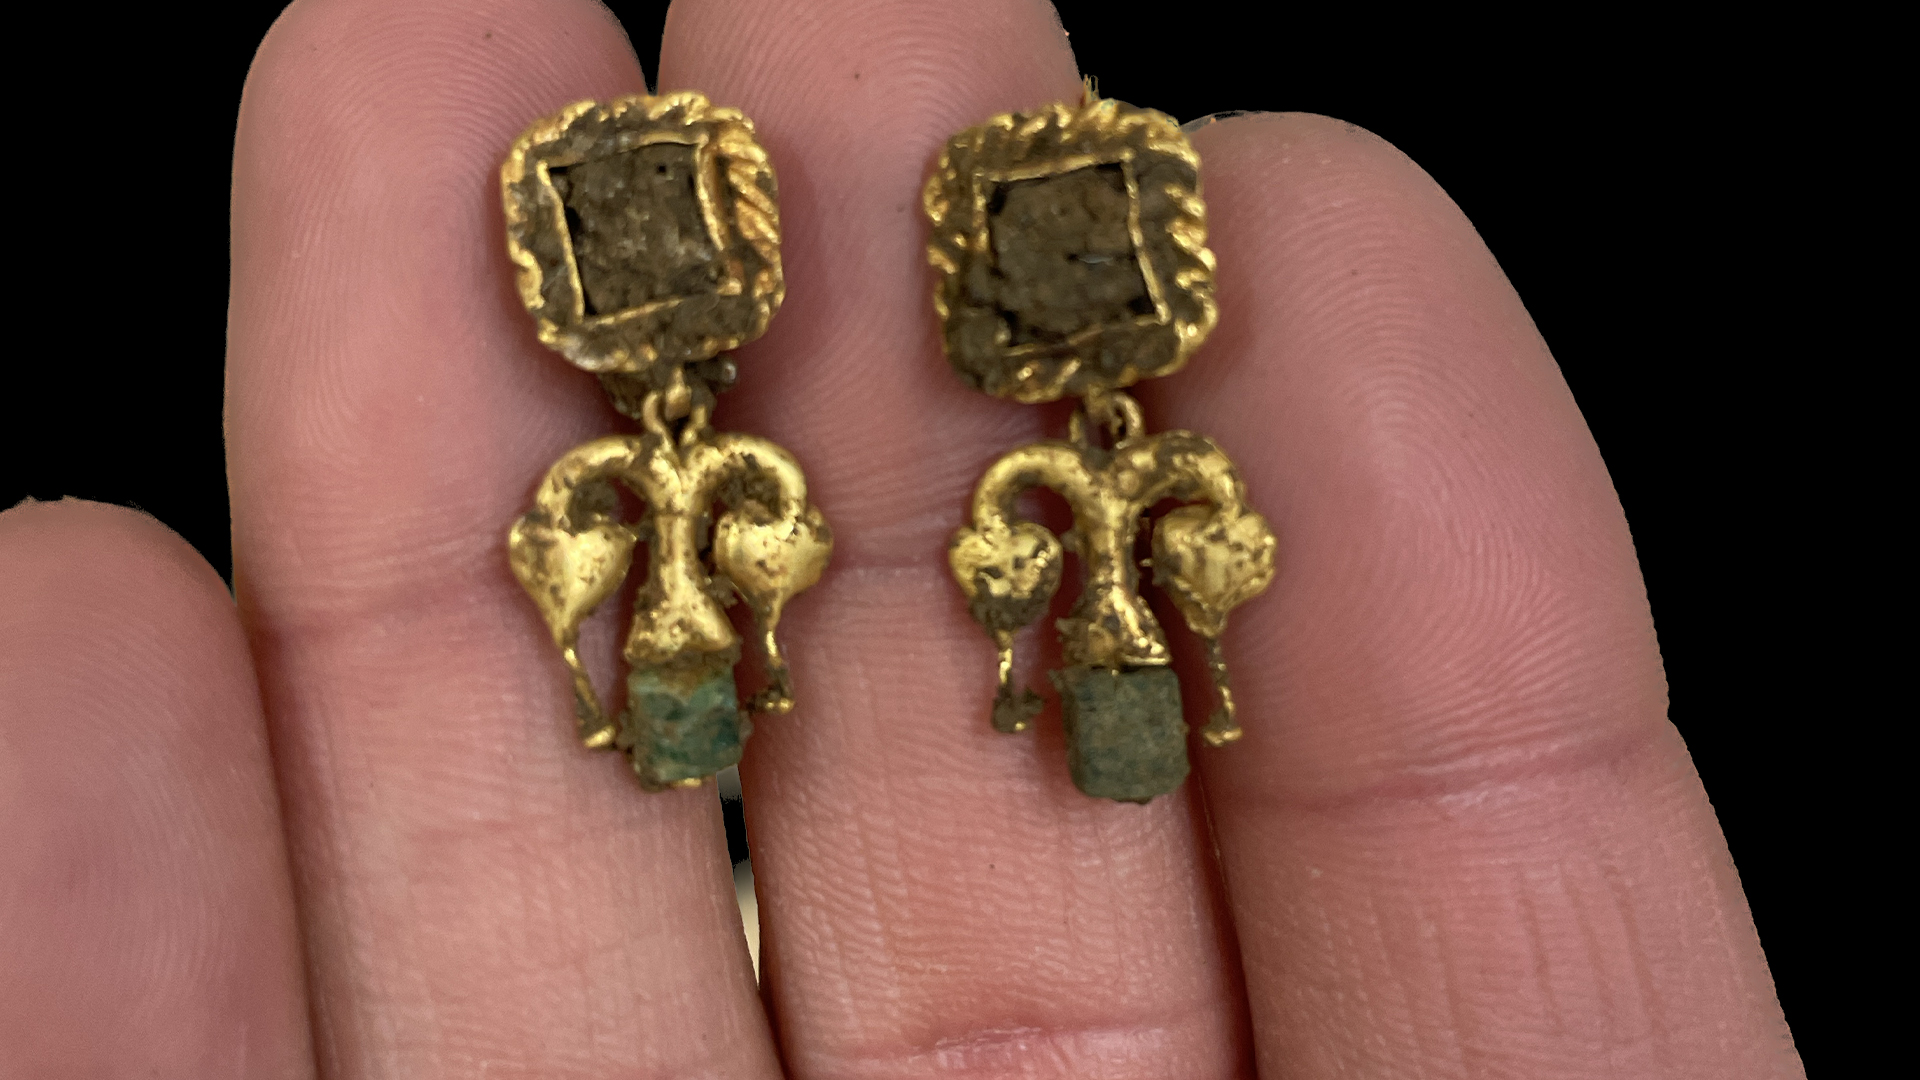 Gold earrings after conservation.